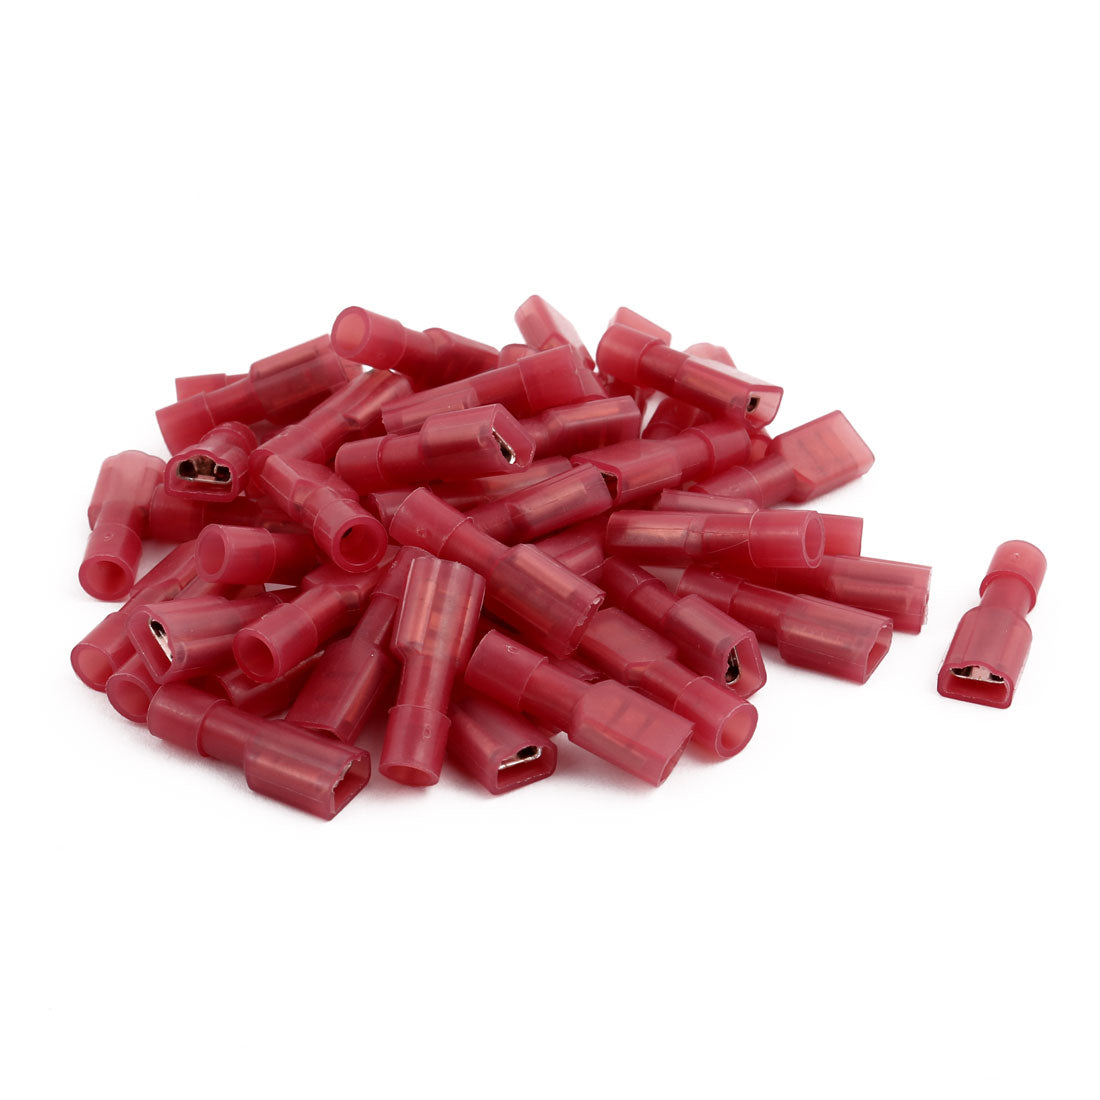 uxcell Uxcell 50Pcs FDFN1-187 22-16AWG Insulated Female Spade Crimp Terminal Connector Red